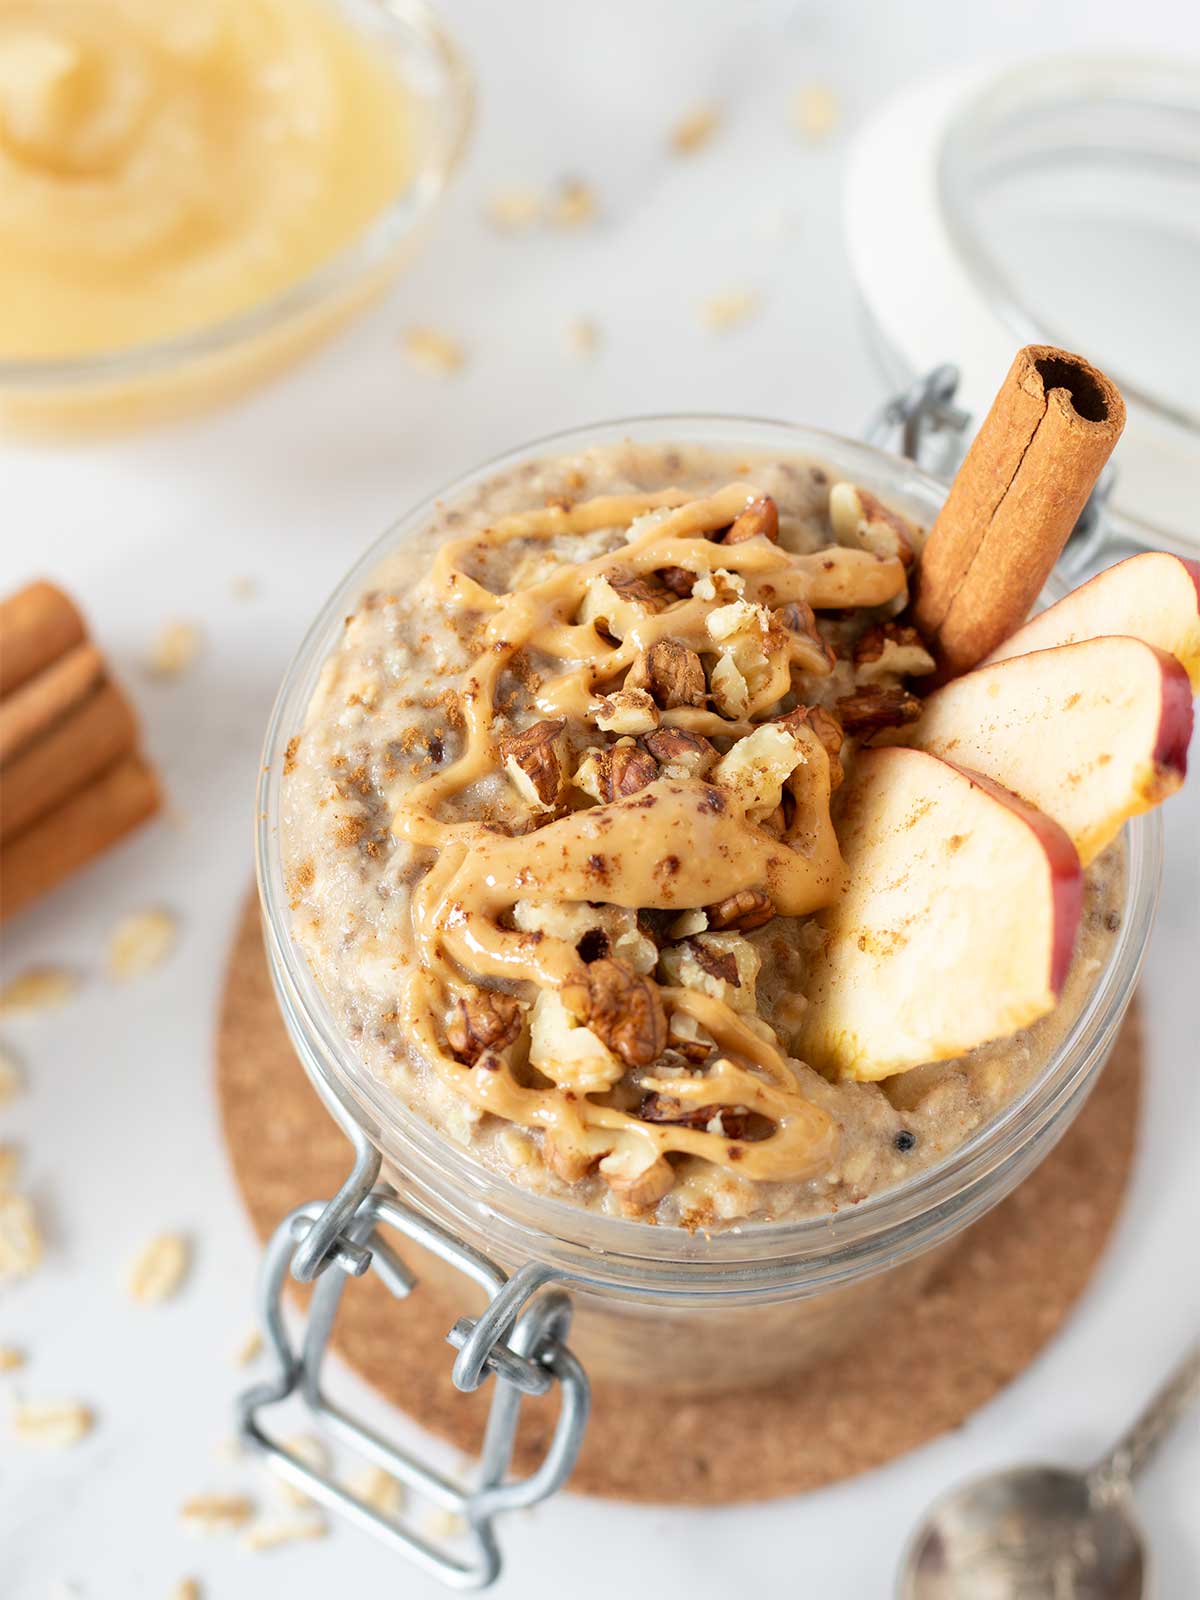 Vegan applesauce oatmeal in a jar with cinnamon, peanut butter, and walnuts.